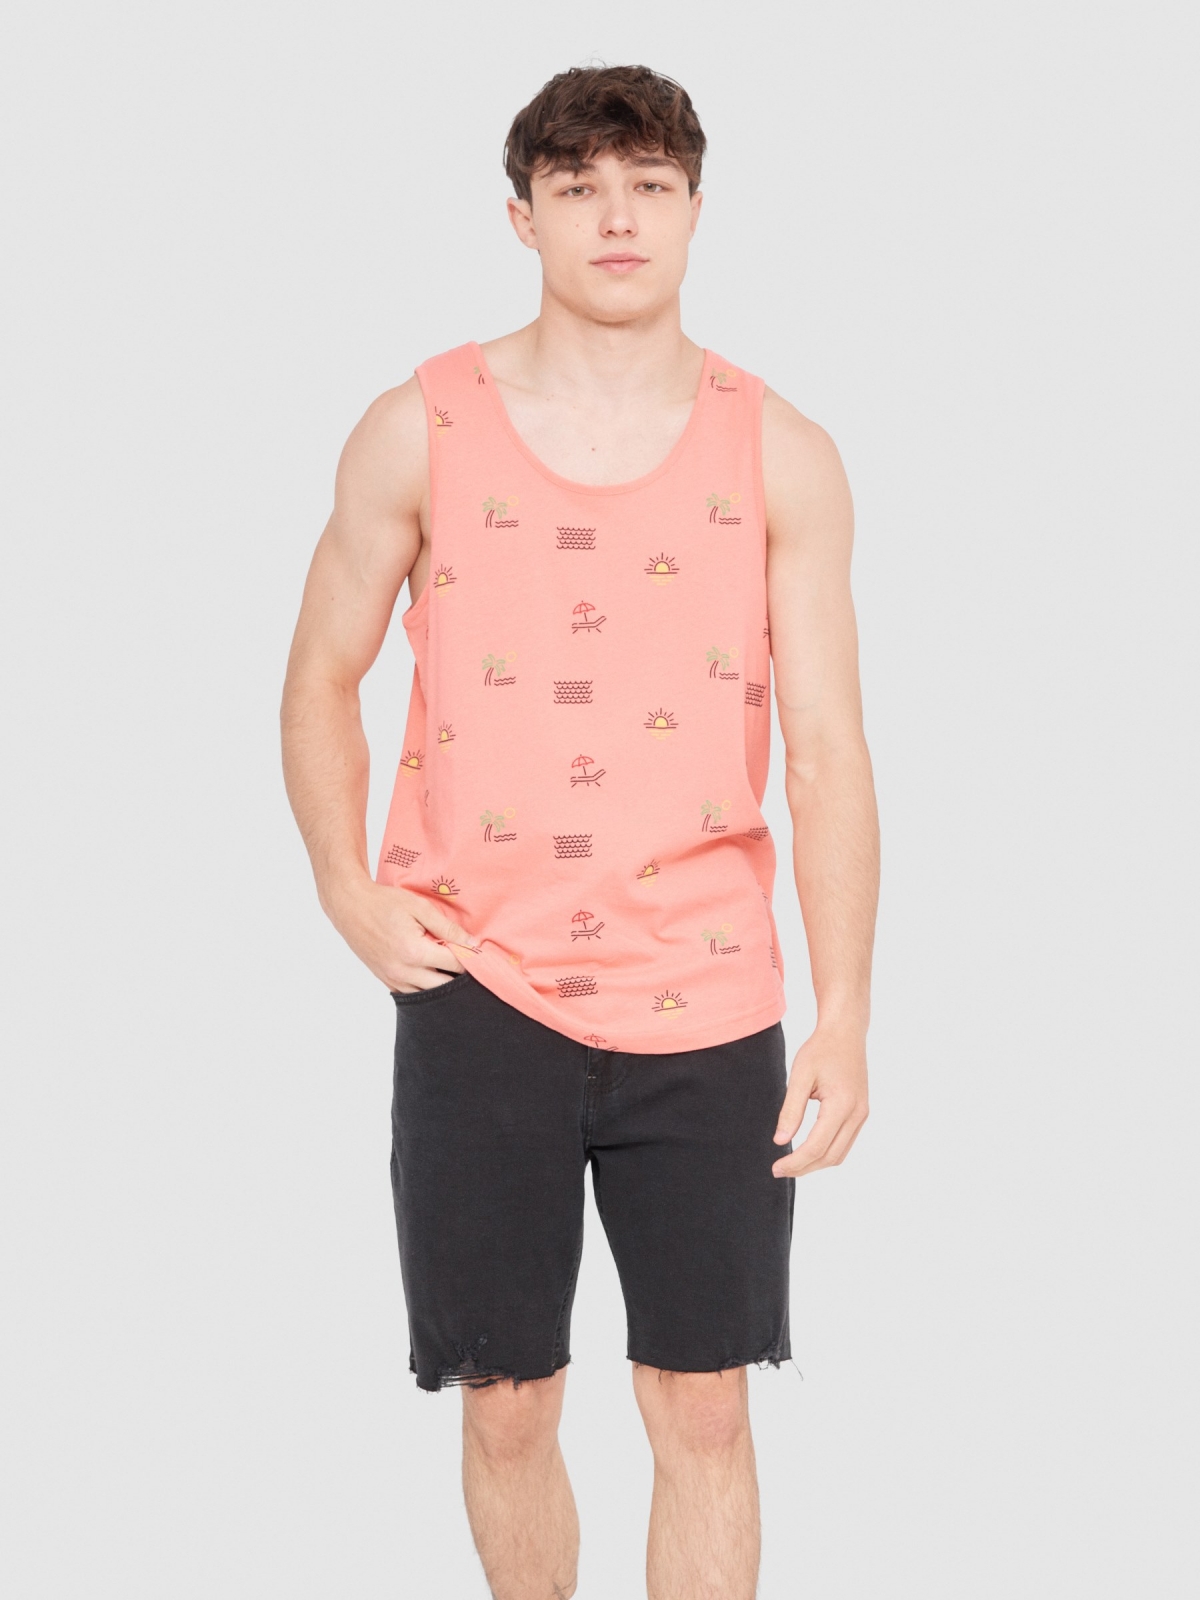 Tropical tank top pink middle front view